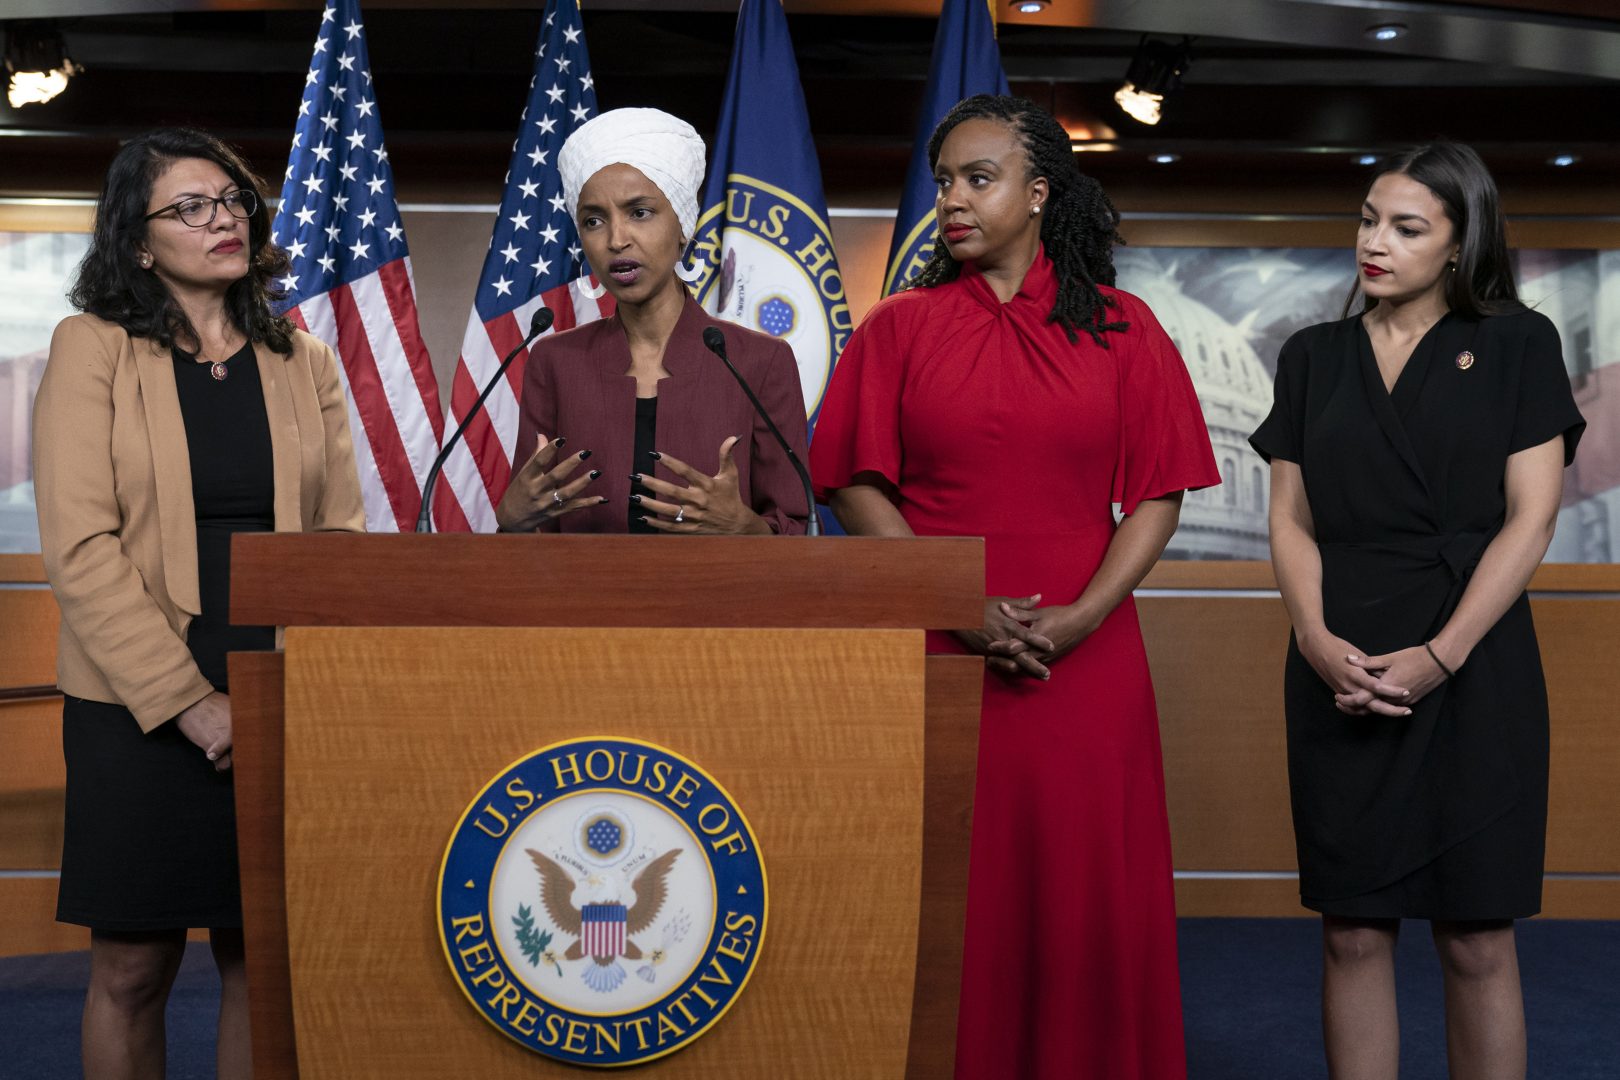  In this Monday, July 15, 2019, file photo, U.S. Rep. Ilhan Omar, D-Minn, second from left, speaks, as U.S. Reps., from left, Rashida Tlaib, D-Mich.,Ayanna Pressley, D-Mass., and Alexandria Ocasio-Cortez, D-N.Y., listen, during a news conference at the Capitol in Washington. 